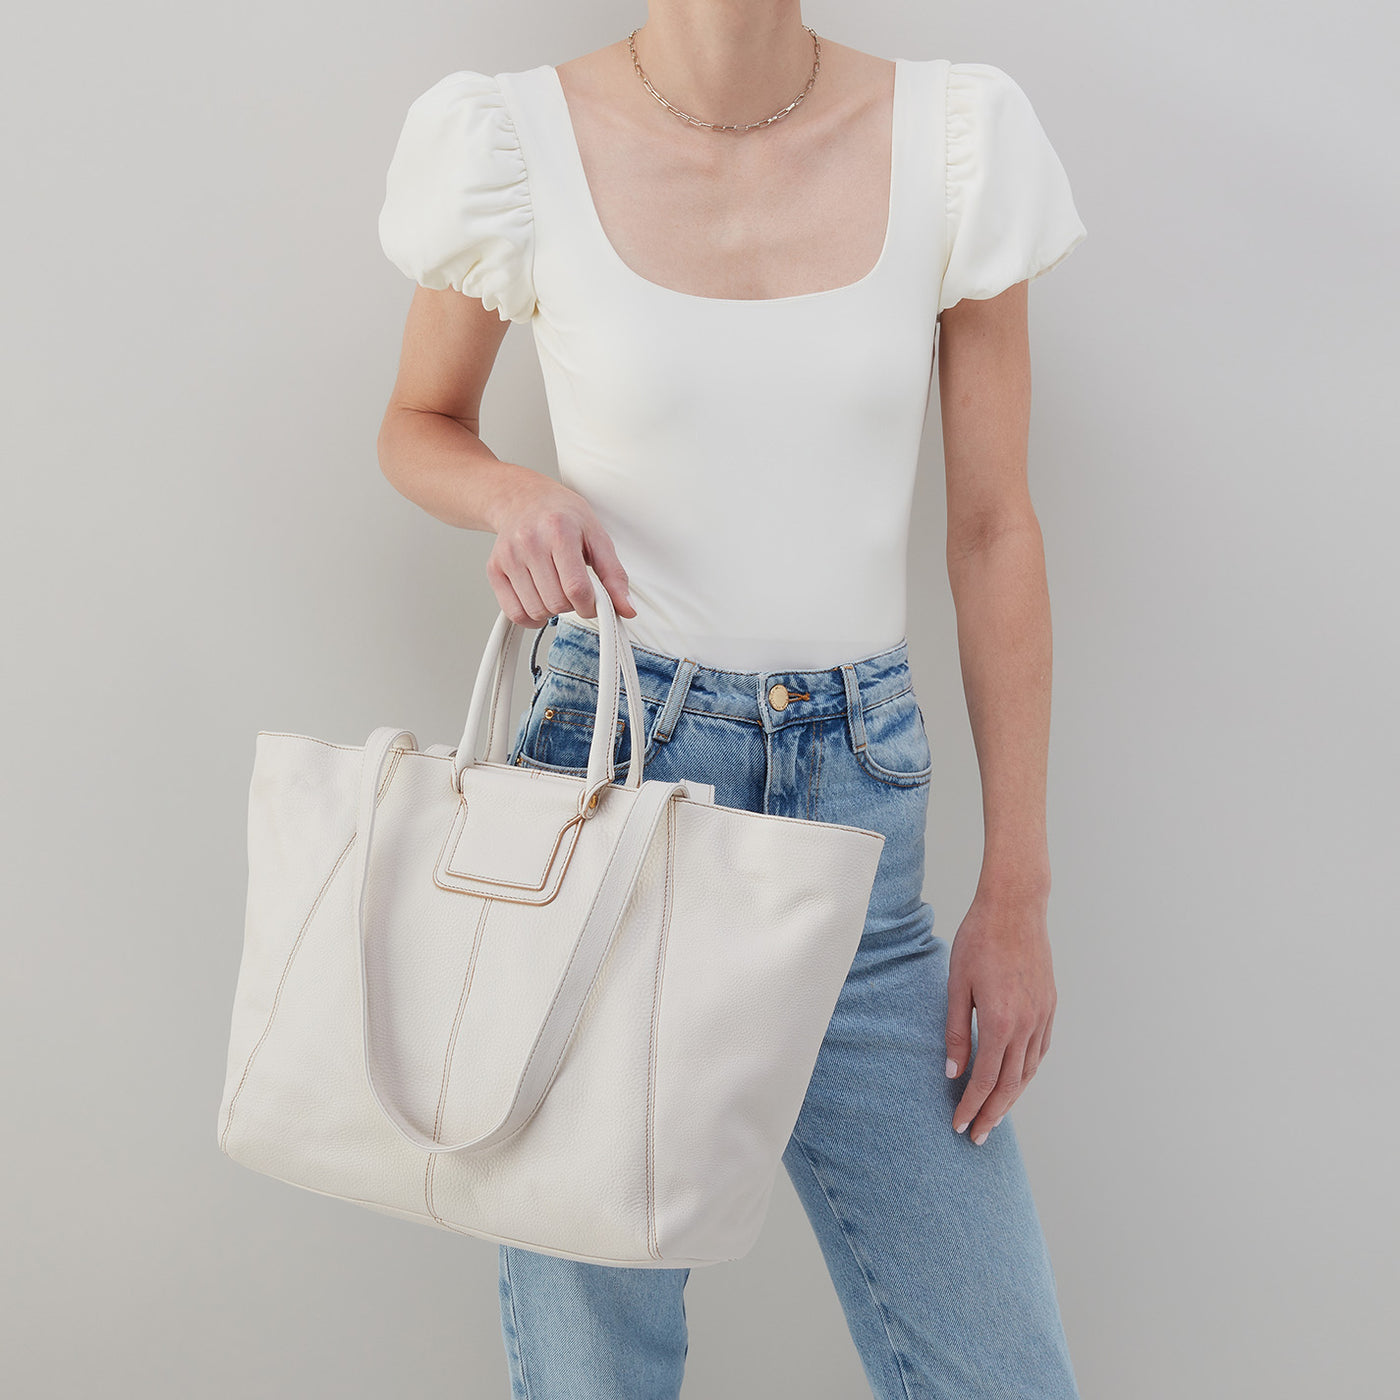 Sheila East-West Tote in Pebbled Leather - White